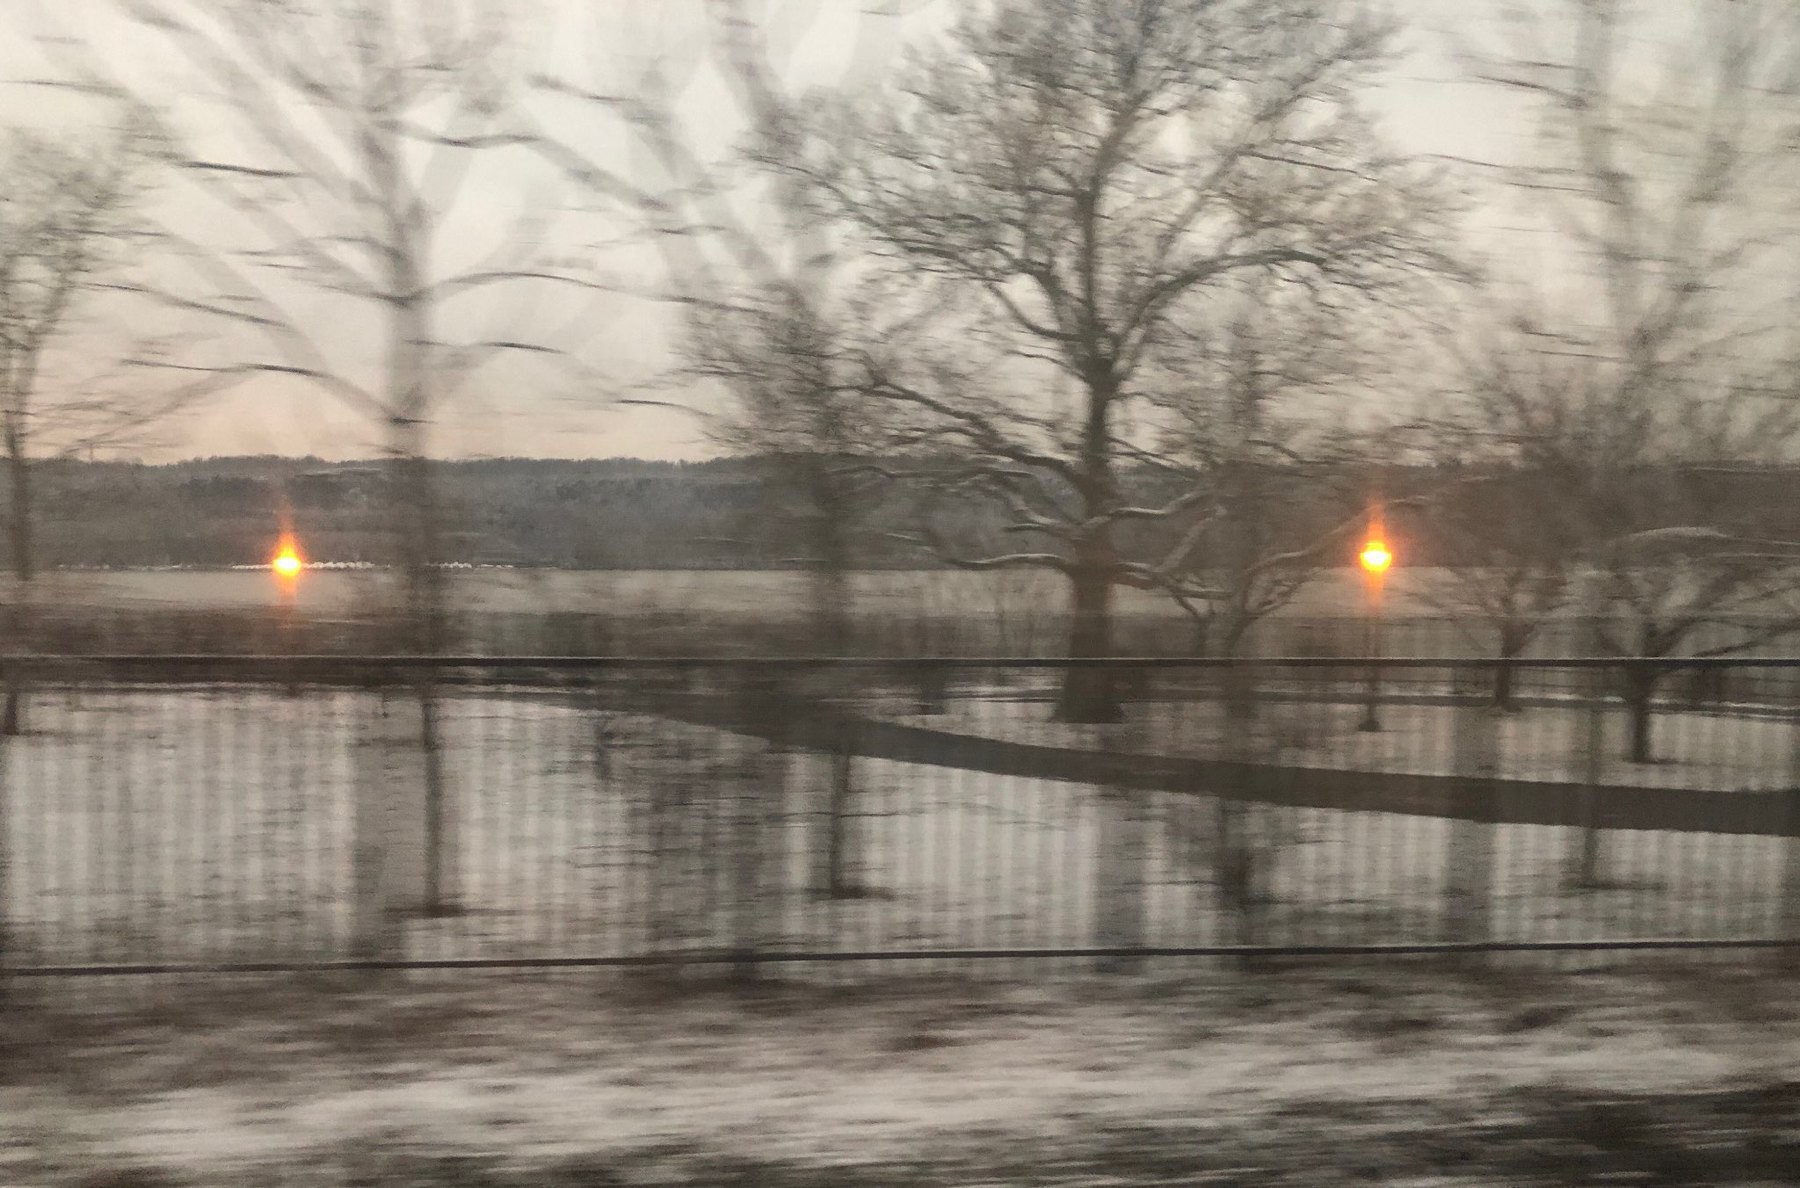 Snowy view of the Hudson river in the early morning from the train. Old fashioned streetlamps are still lit and the trees are bare.